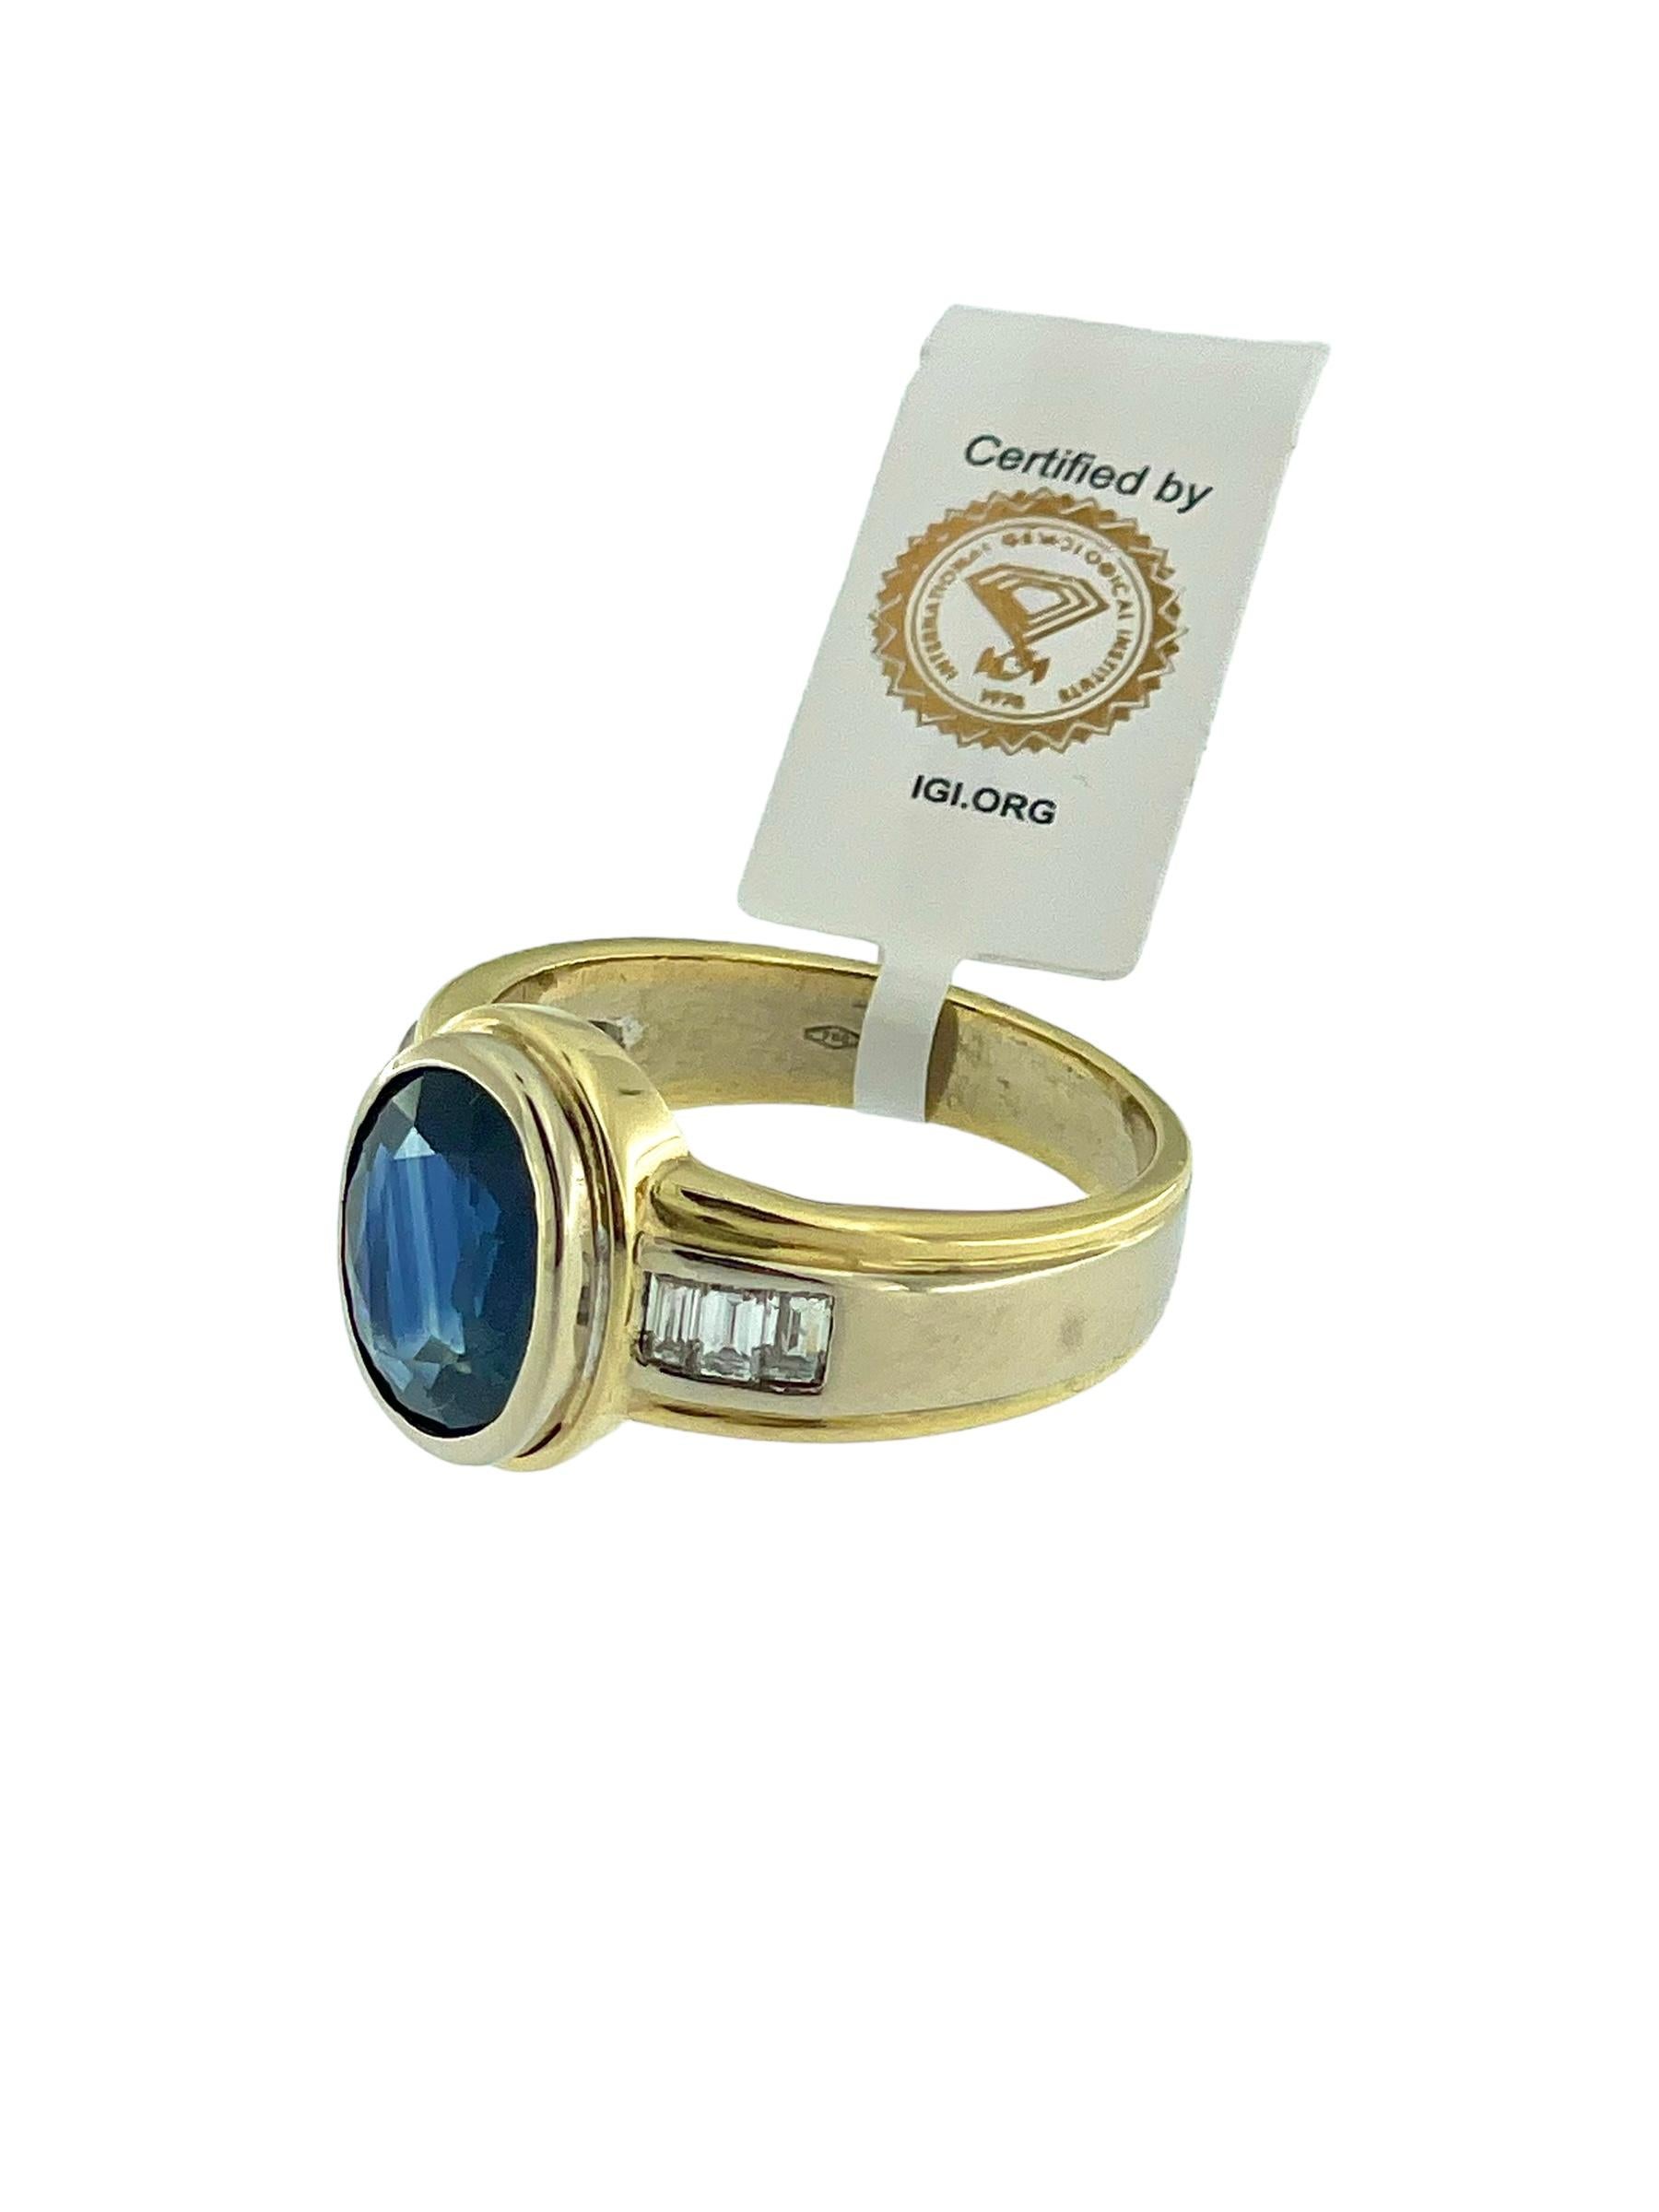 Artisan IGI Certified Gold Band Ring Sapphire and Diamonds For Sale